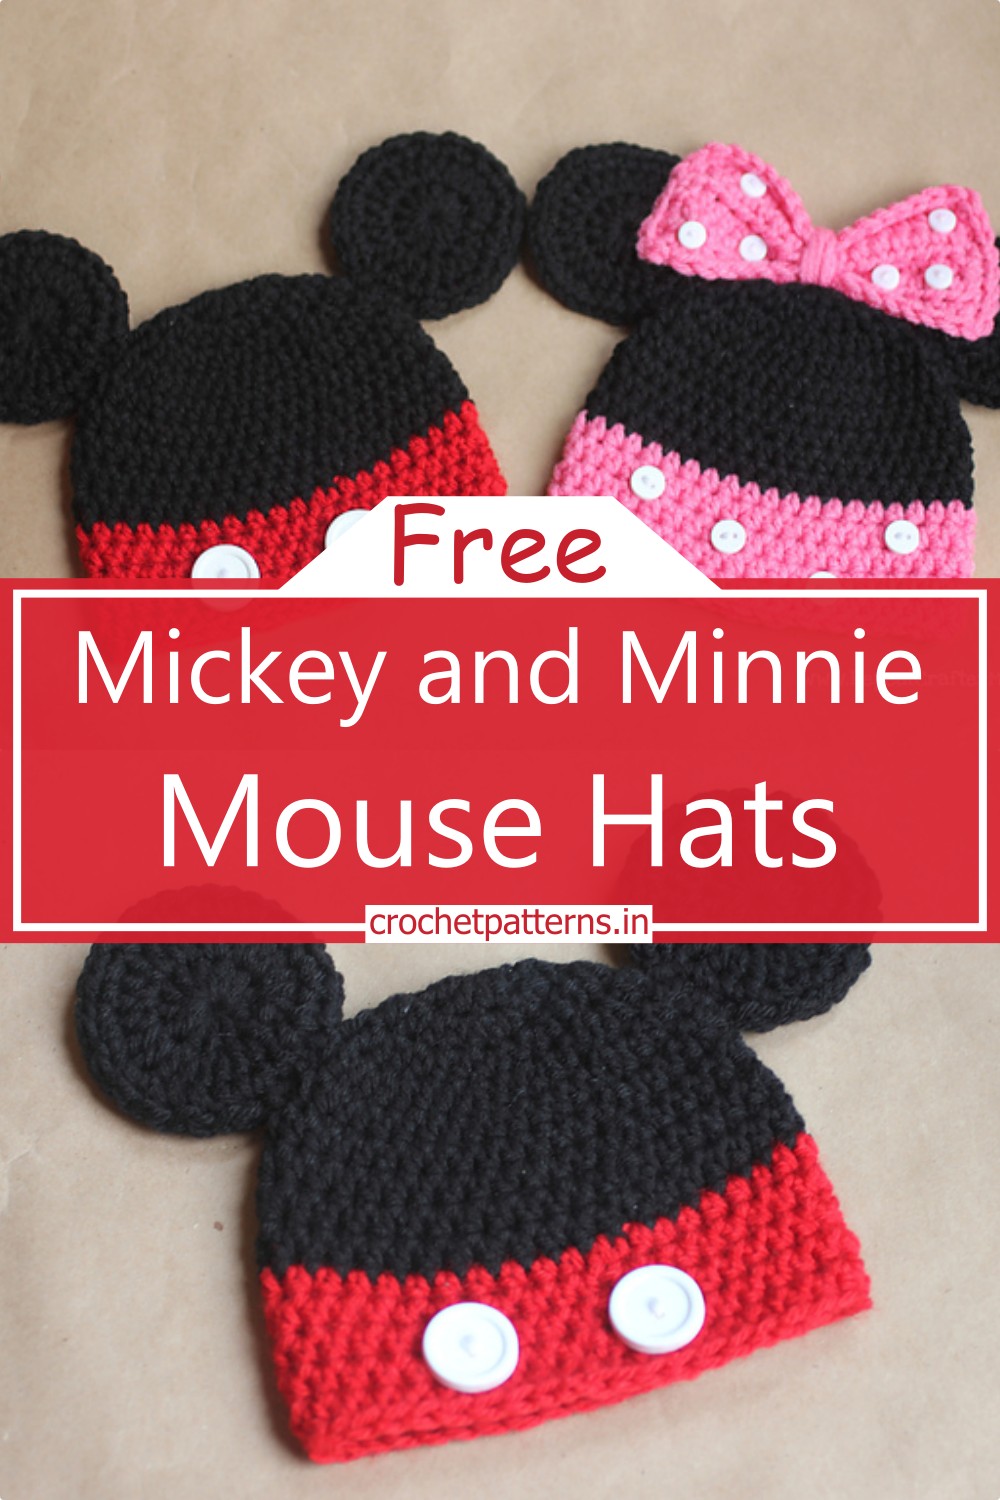 Mickey and Mouse Hats